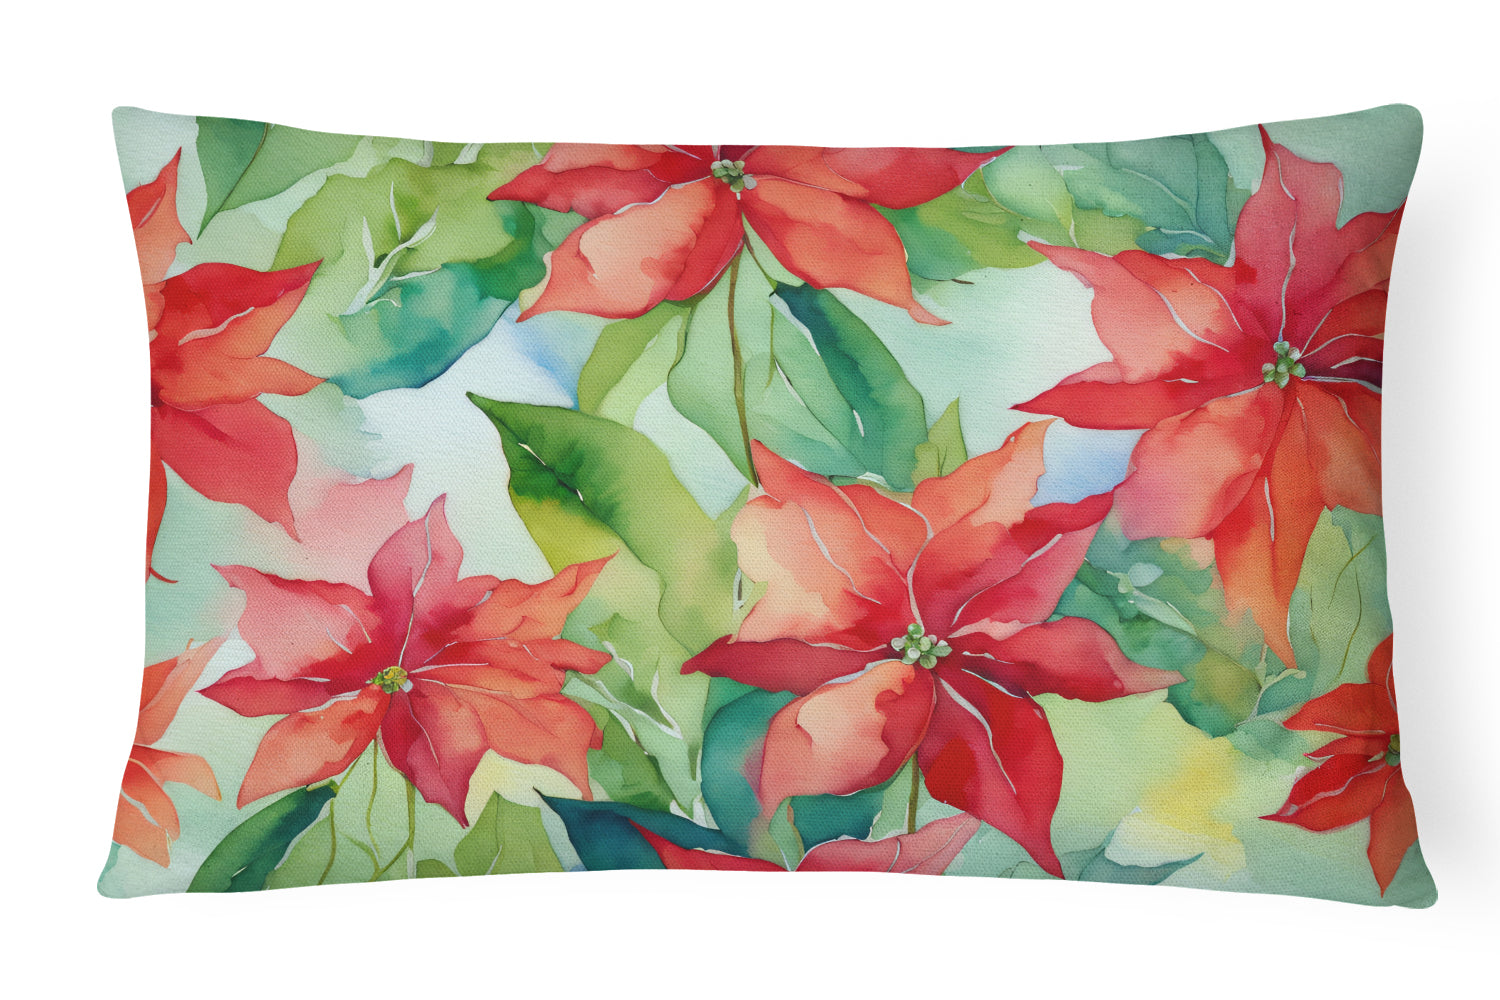 Buy this Poinsettias in Watercolor Fabric Decorative Pillow